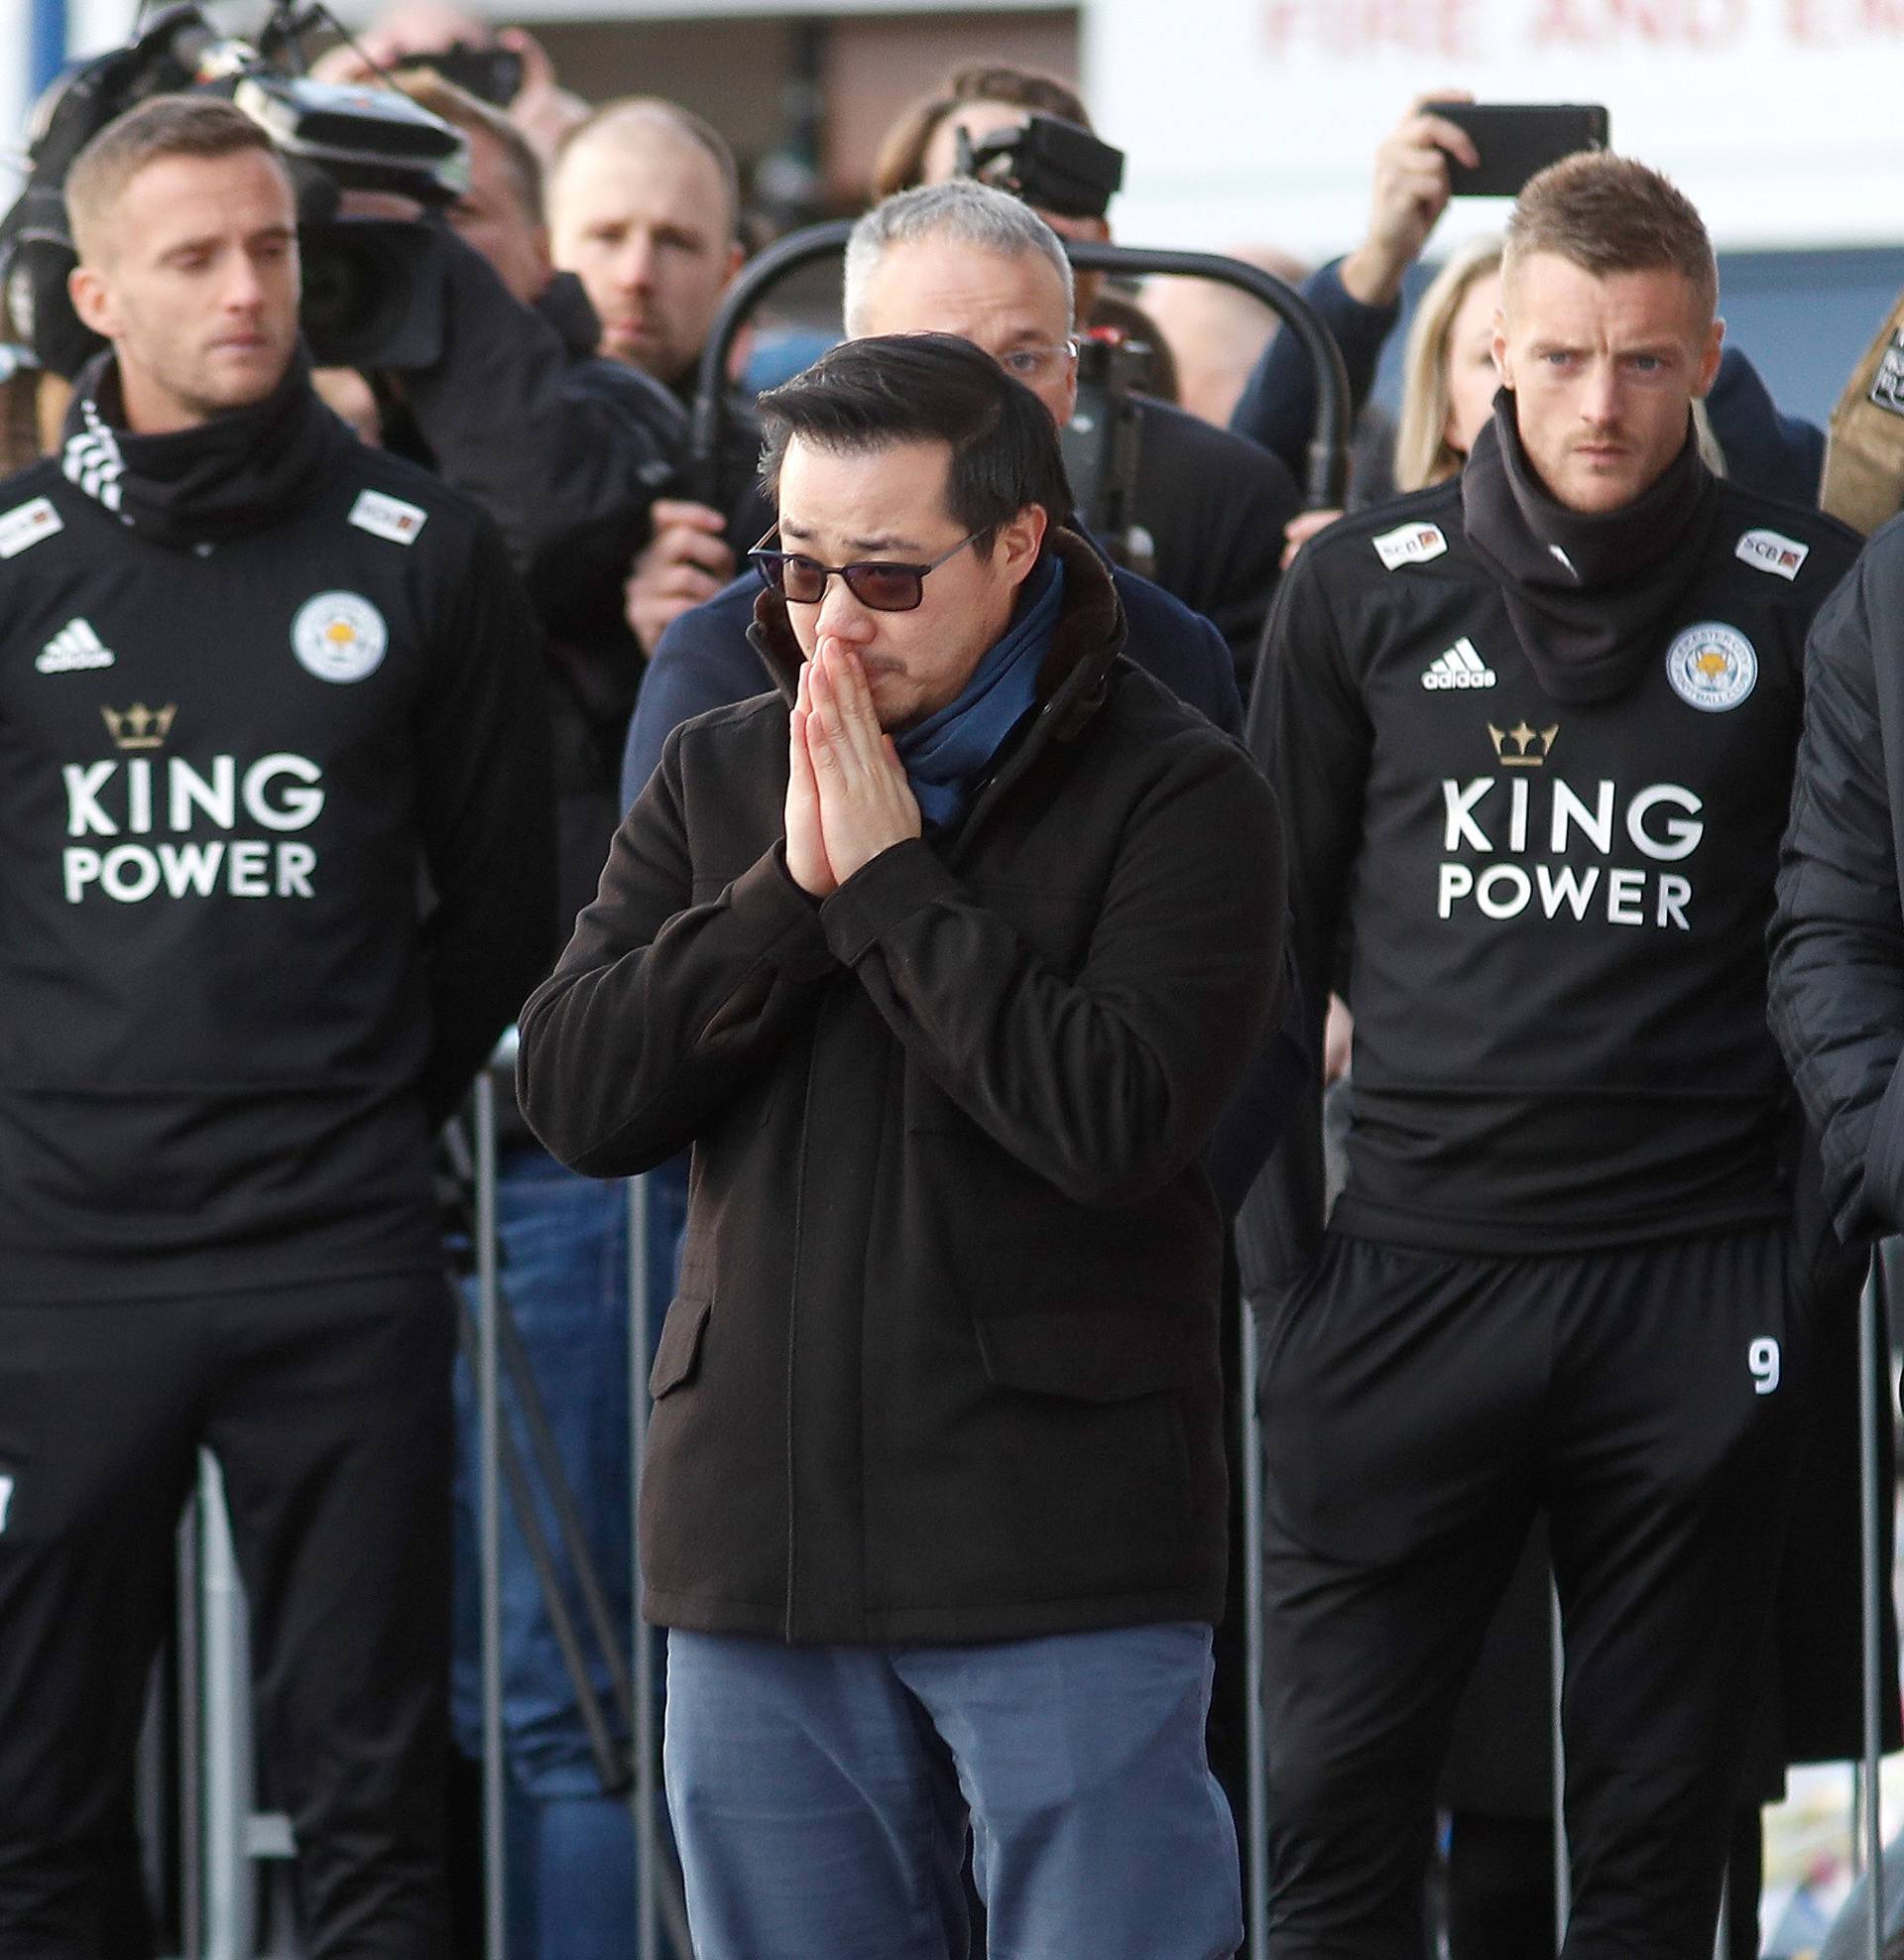 Son of Leicester City's owner Thai businessman Vichai Srivaddhanaprabha, and players look at tributes left for Vichai and four other people who died when the helicopter they were travelling in crashed in Leicester